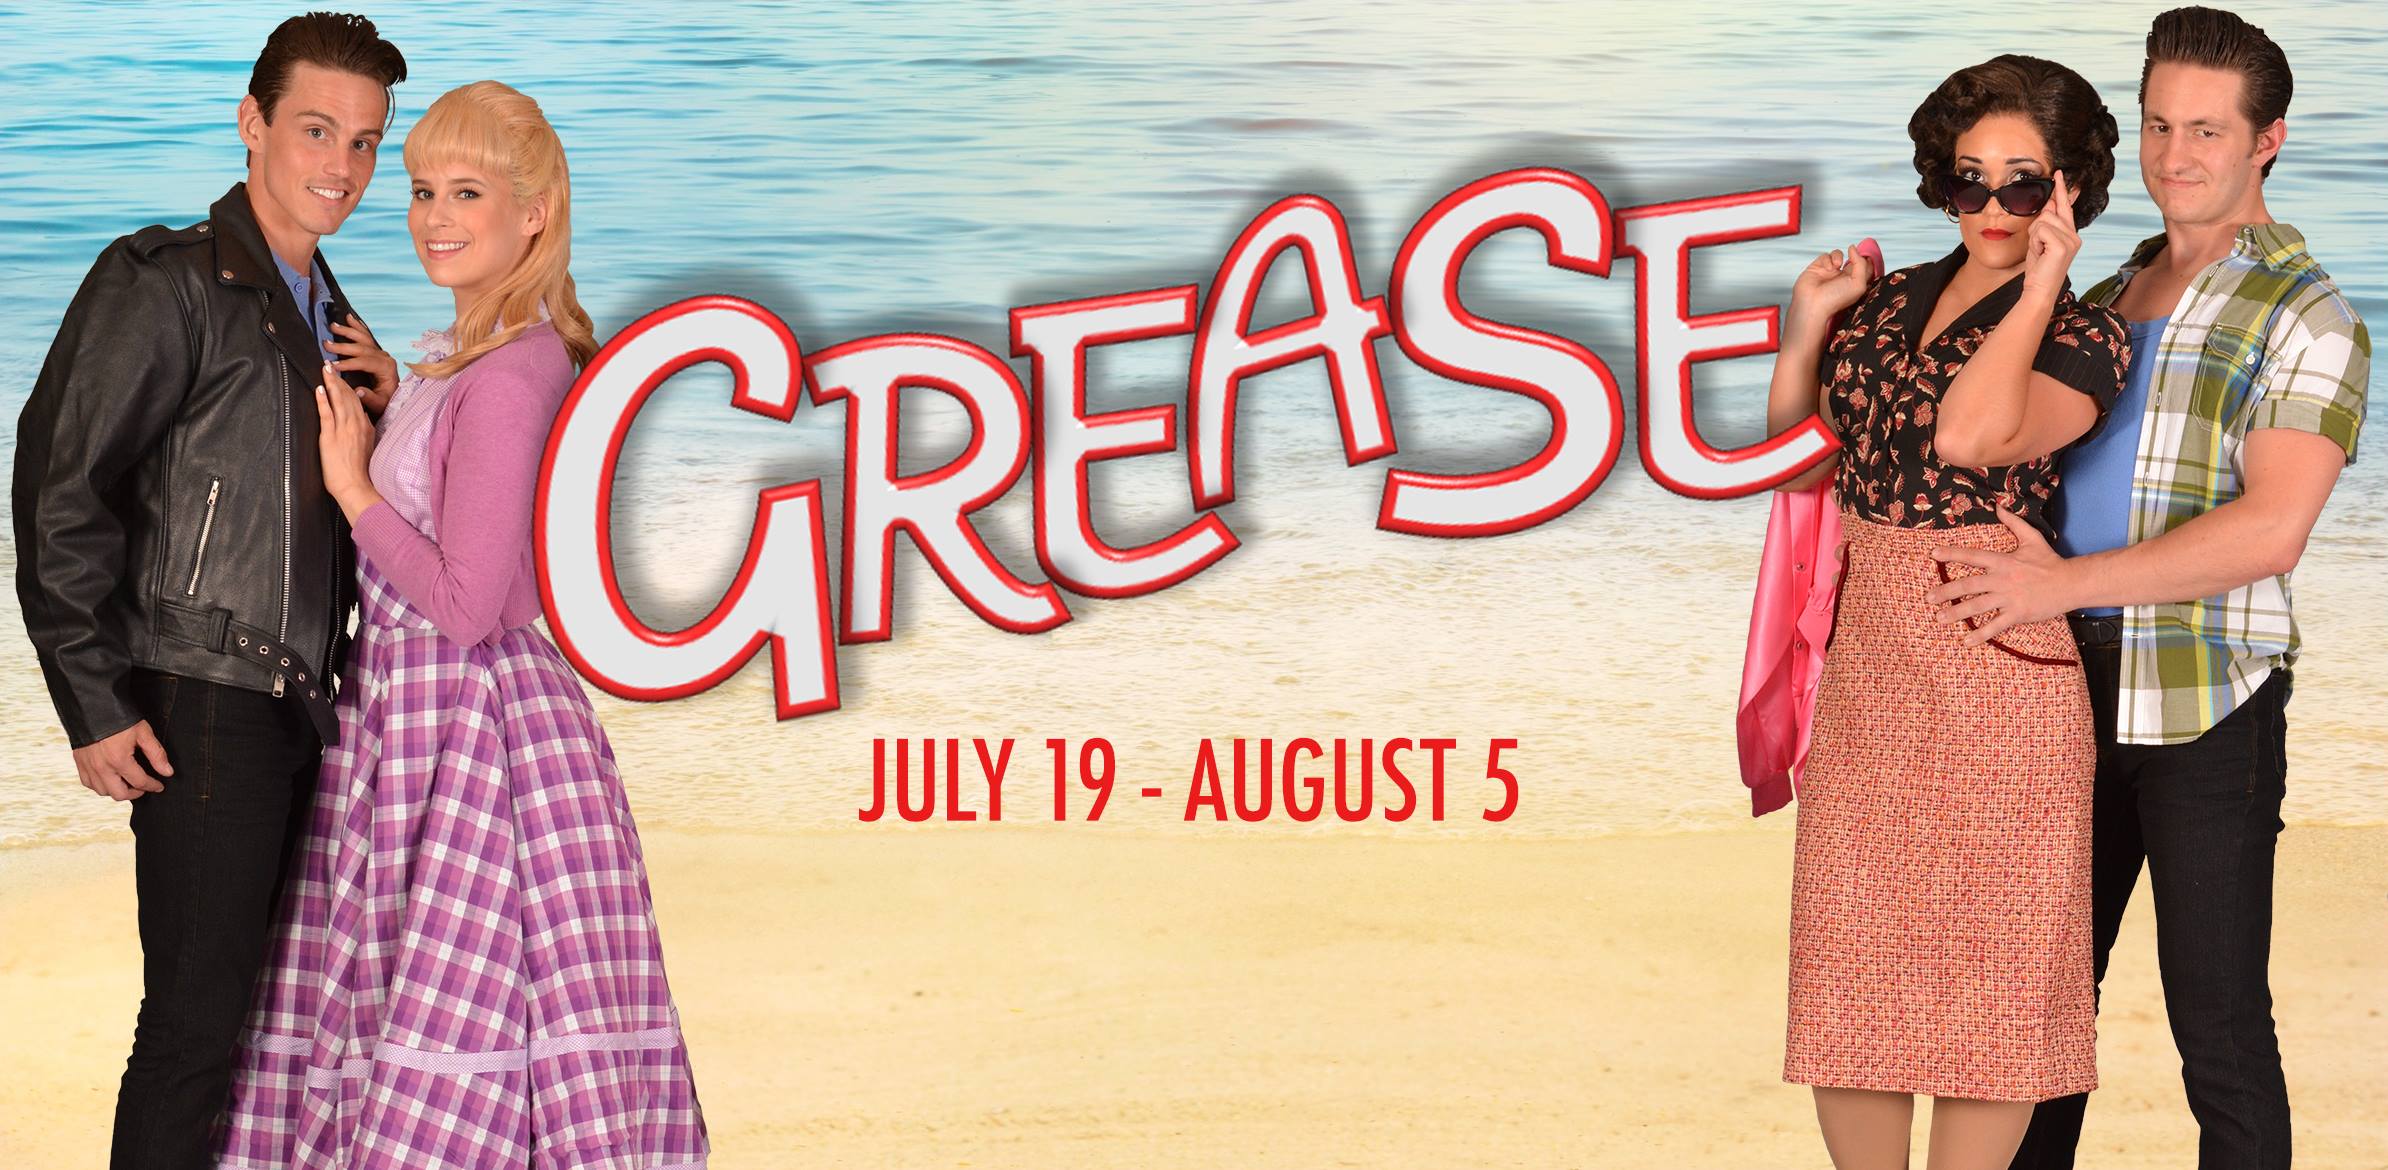 July-August 2017: Grease